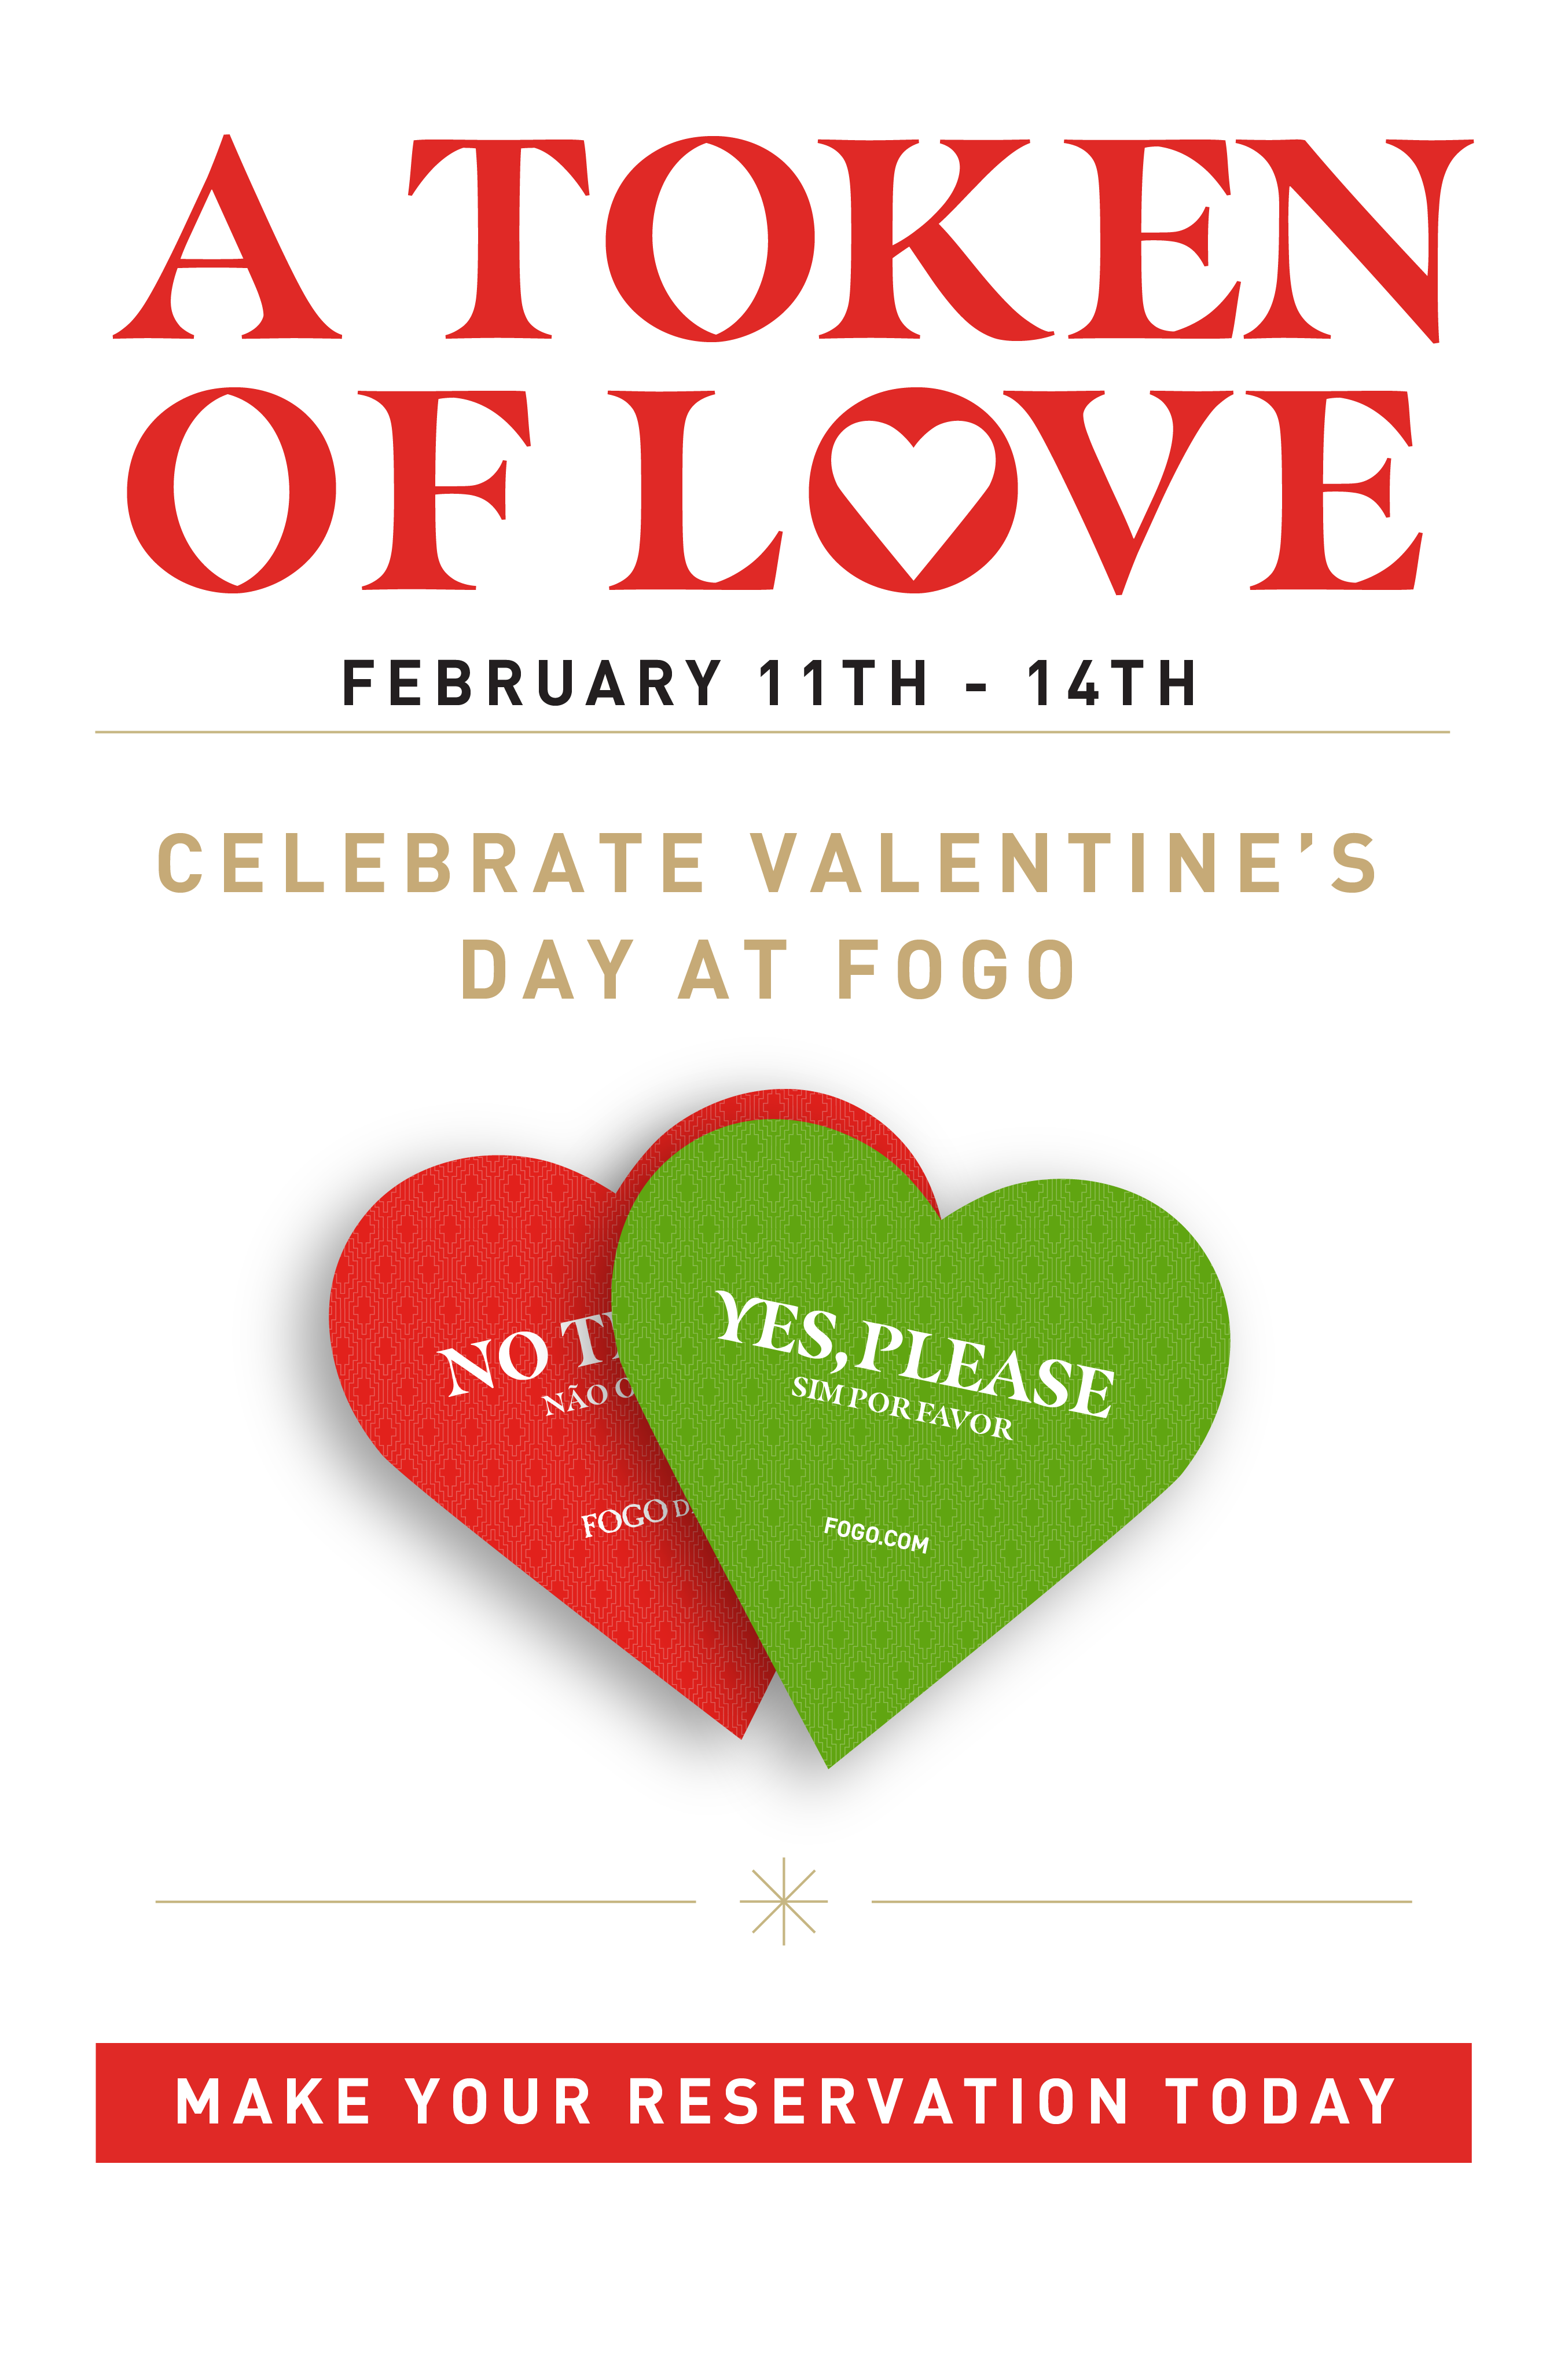 Celebrate Valentine's Day at Fogo - February 11th-14th. Make your reservation today. 